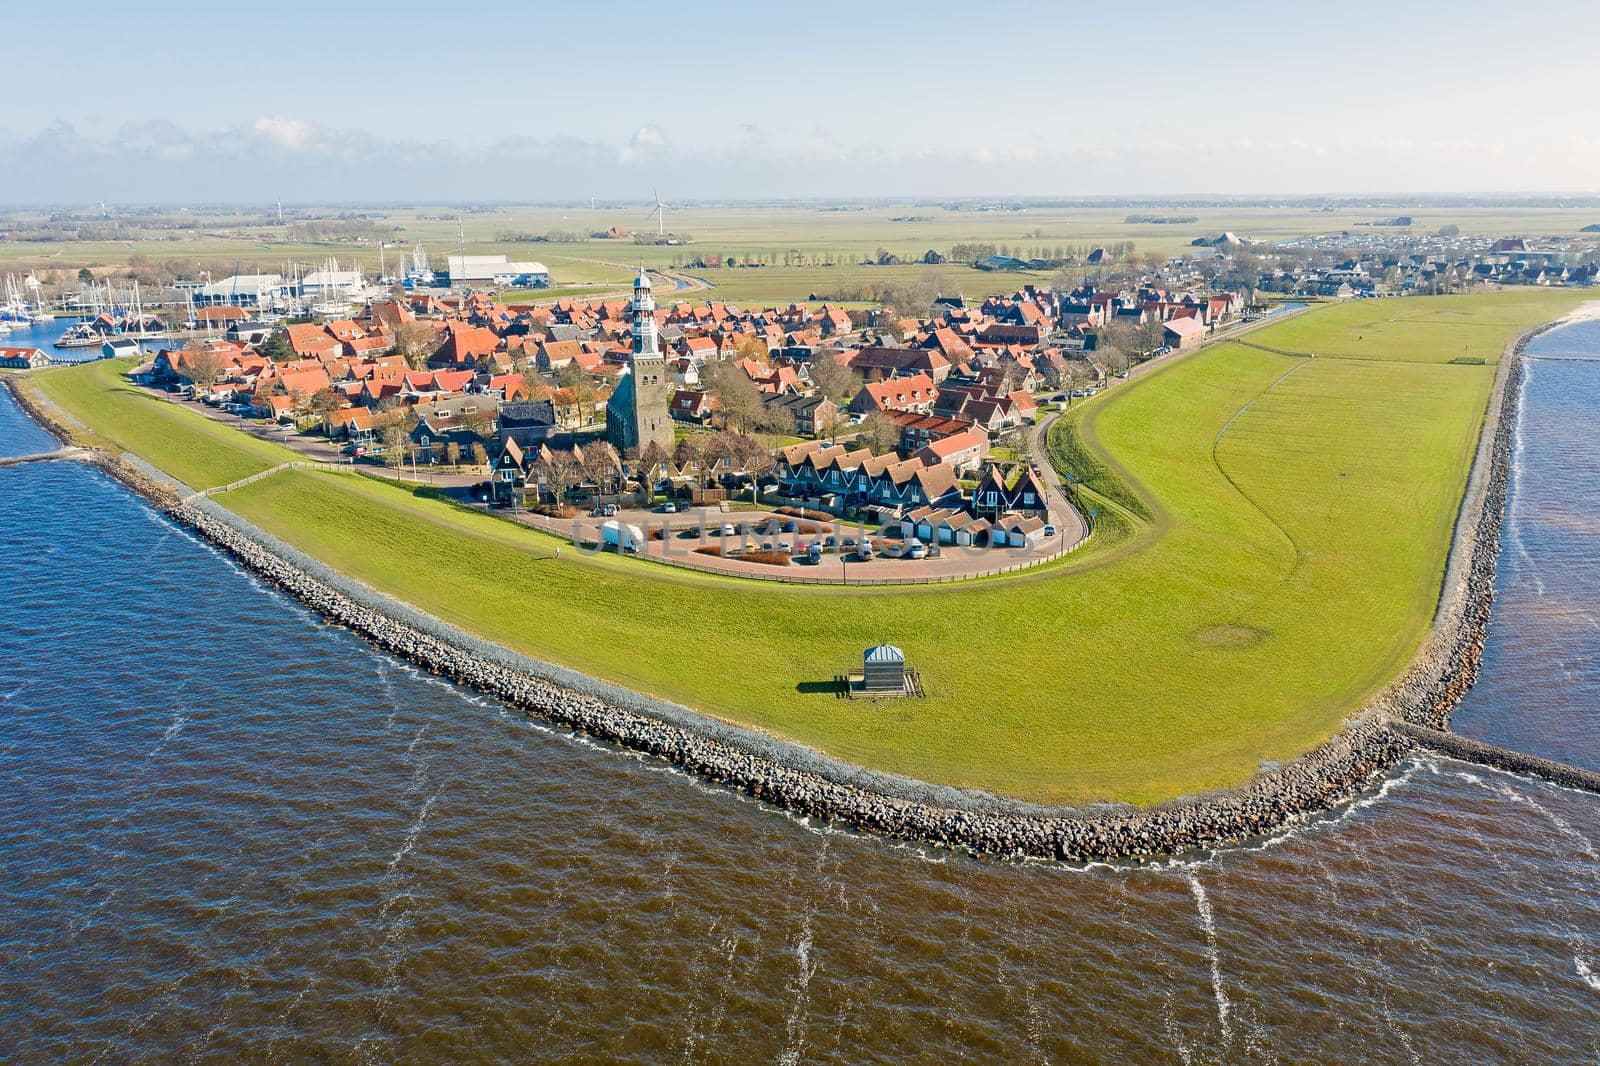 Aerial from the historical town Hindeloopen at the IJsselmeer in the Netherlands